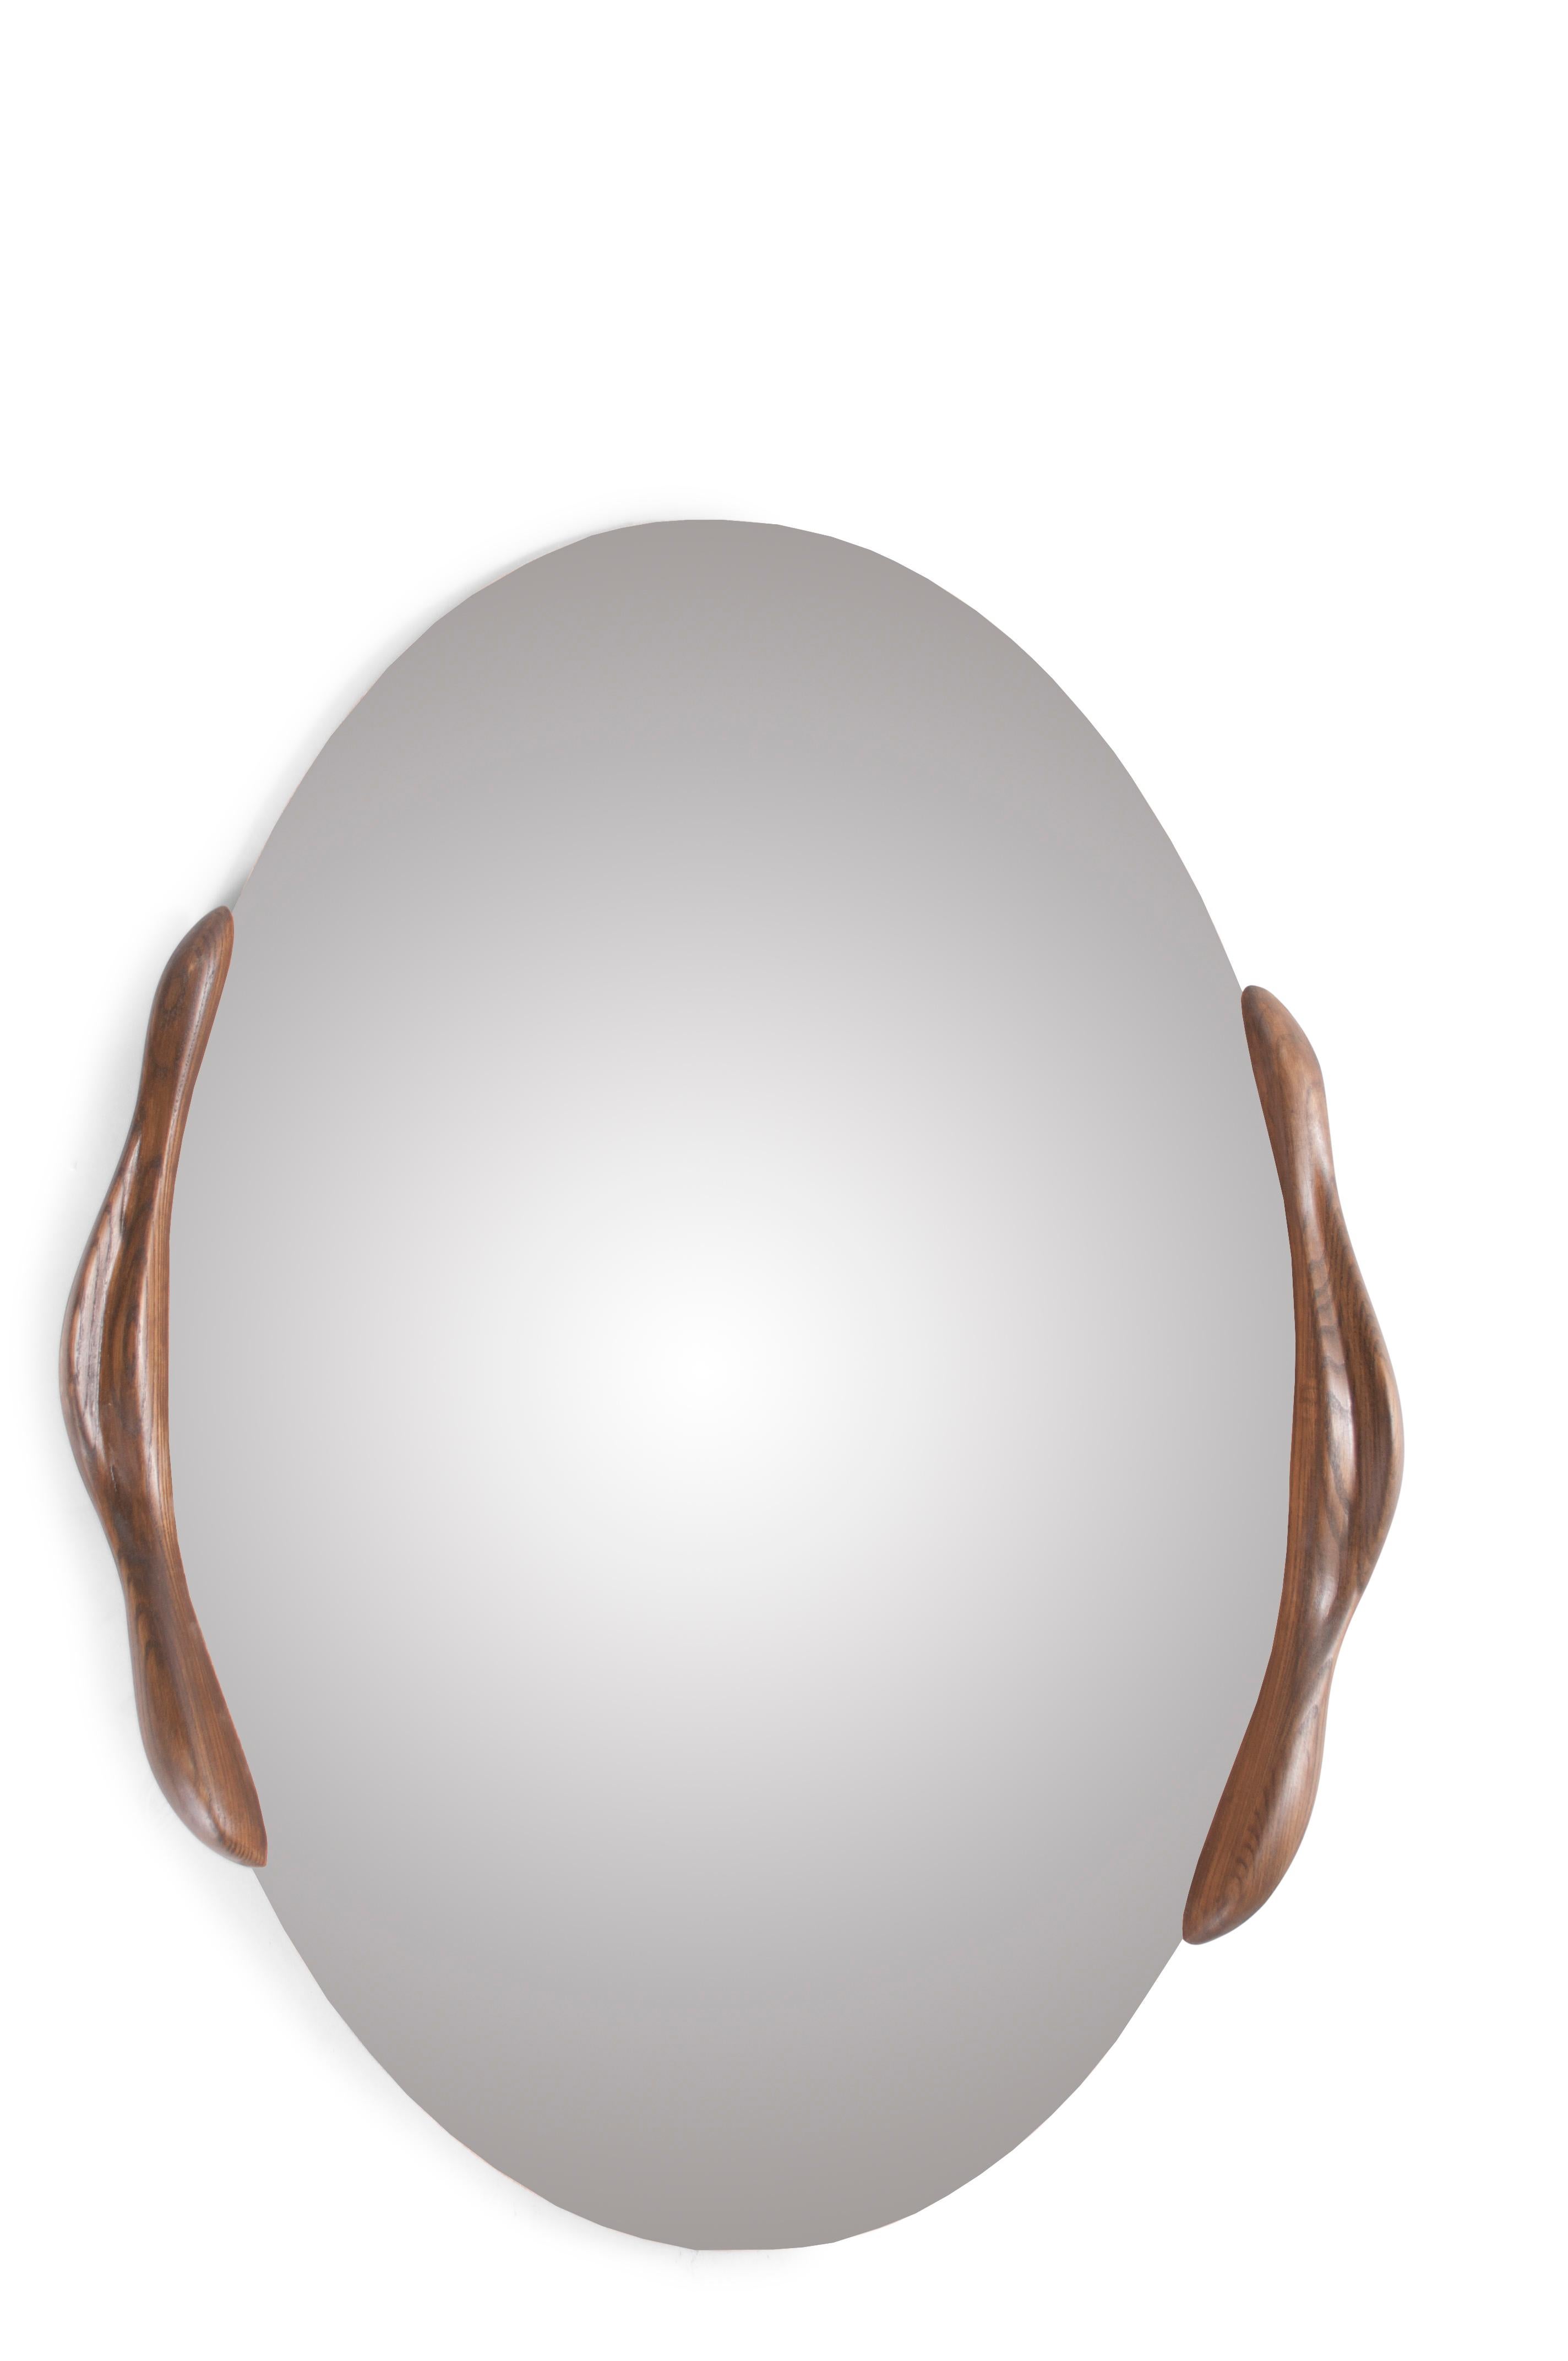 Modern Amorph Oval Shaped Mirror in Walnut stain on Ash wood  For Sale